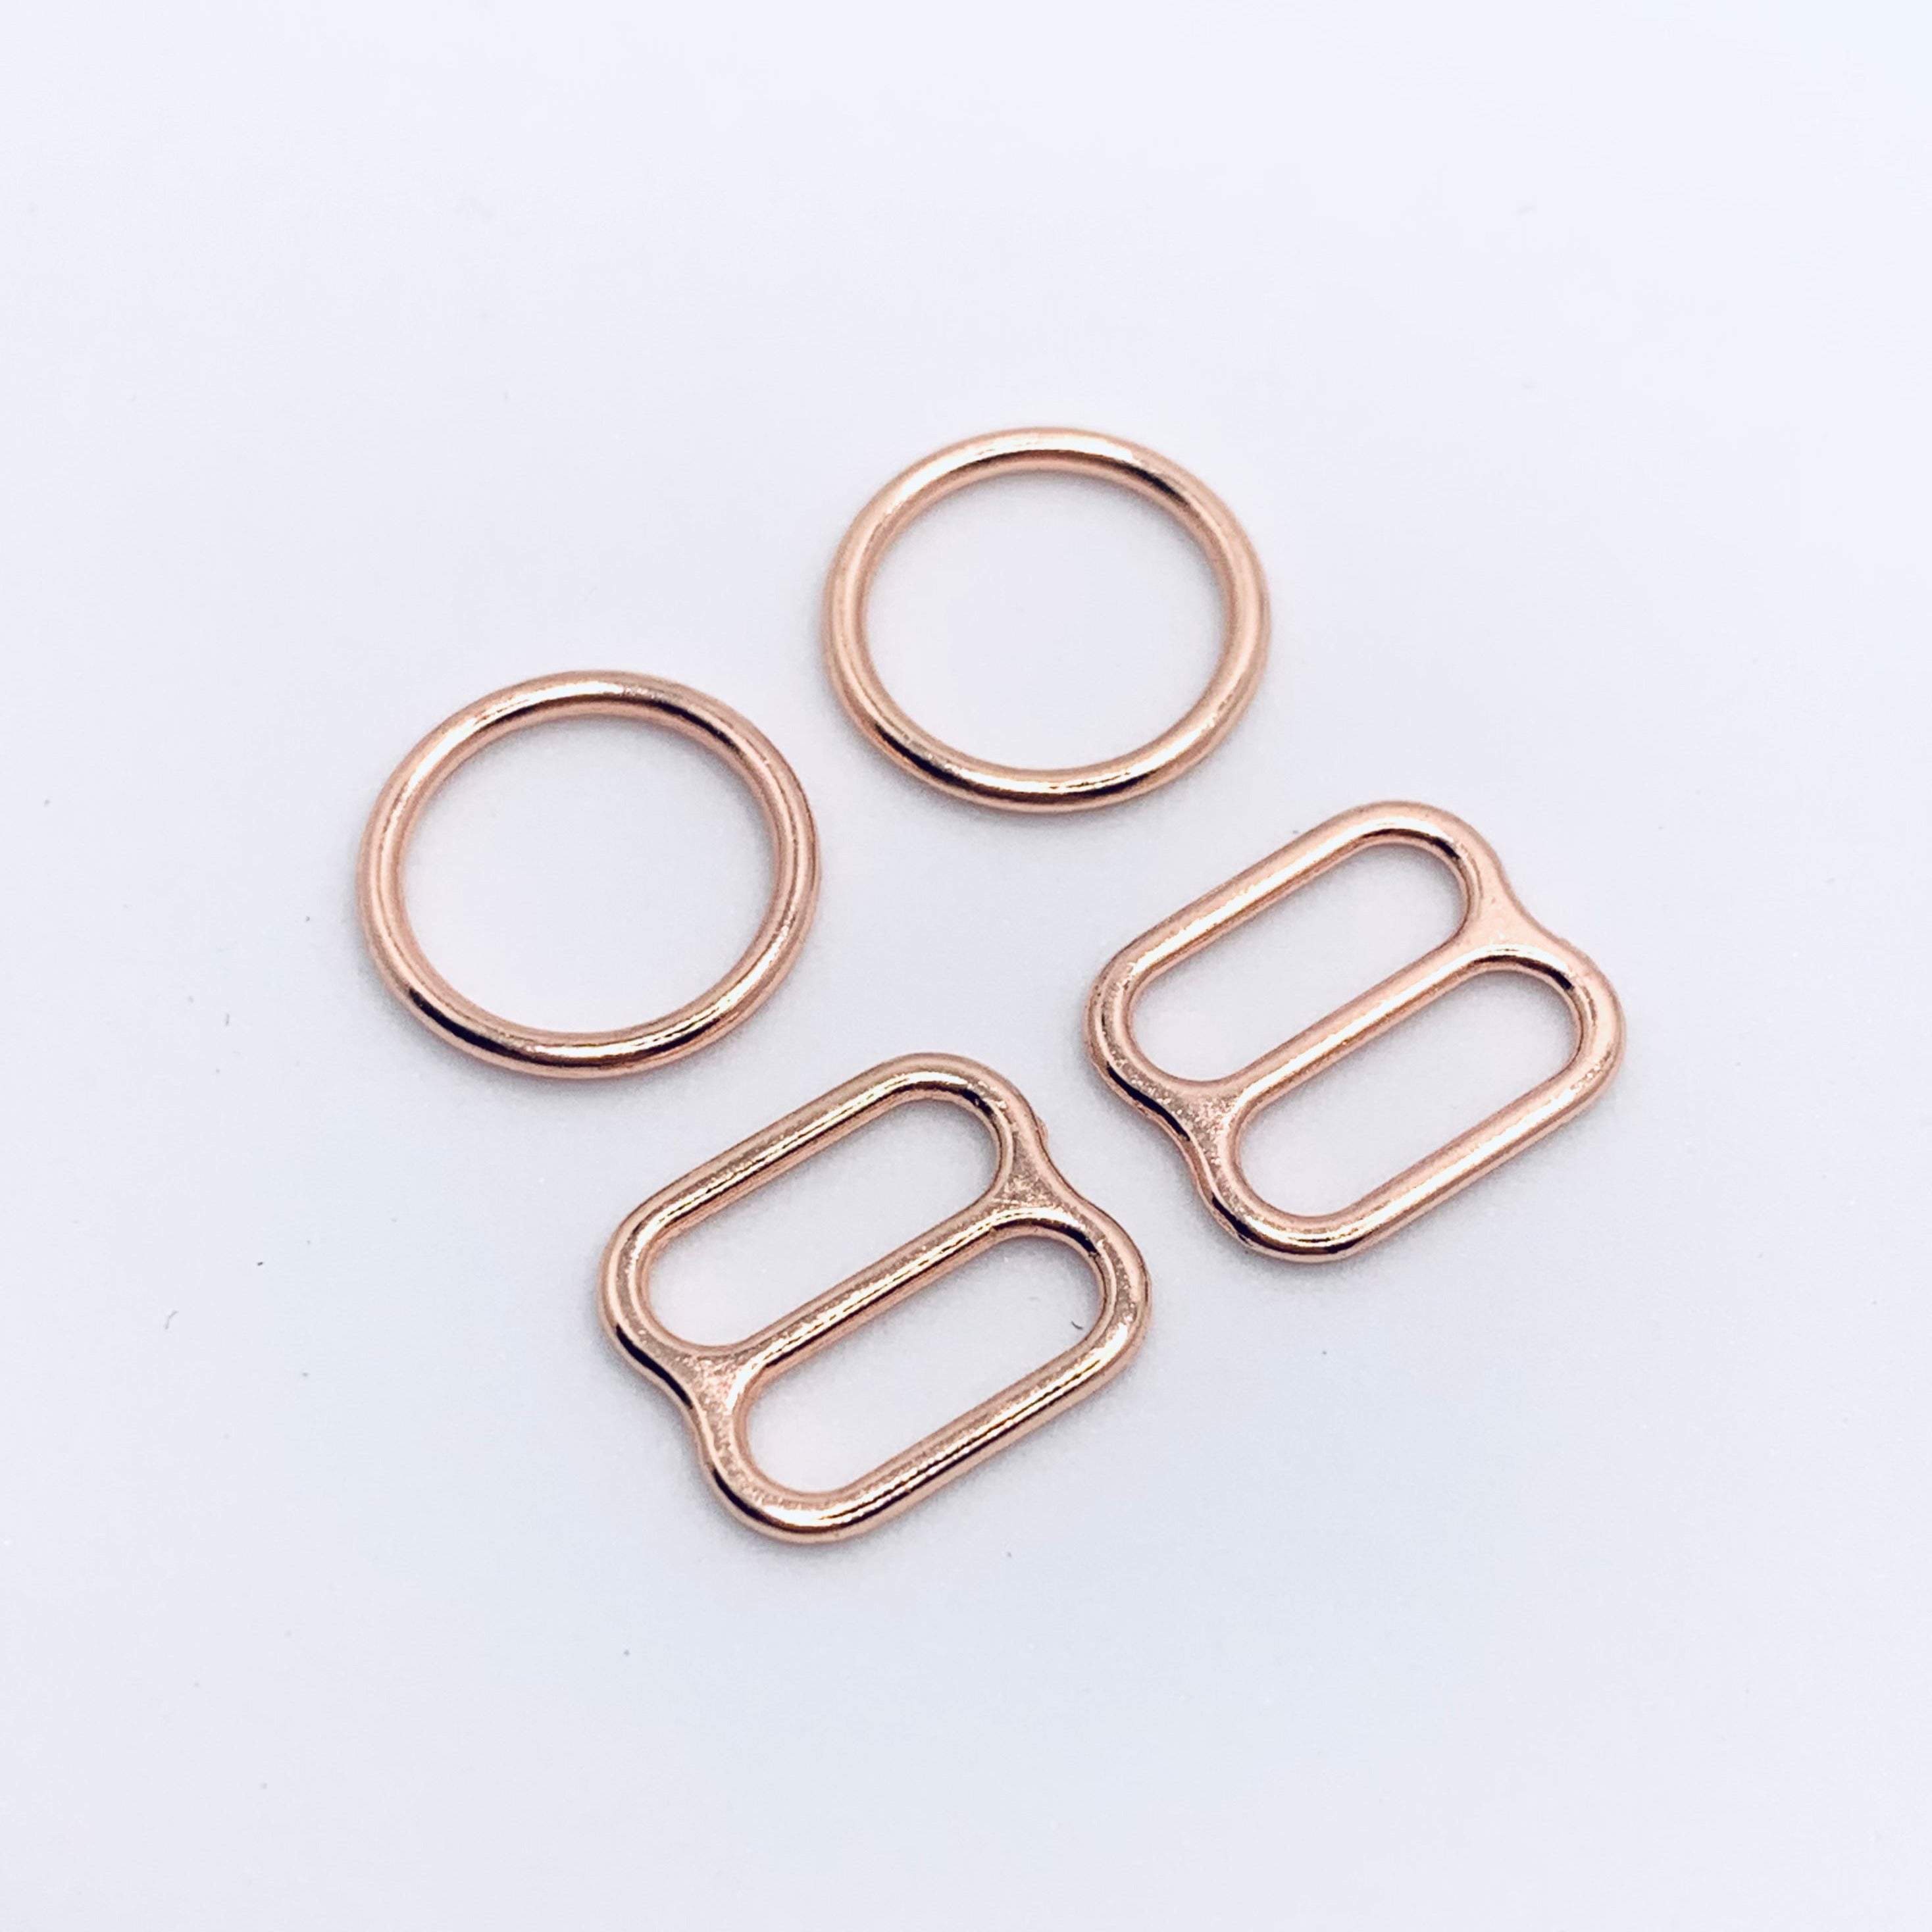 10mm SILVER Colour Bra Rings and Sliders 10mm, 3/8 Metal Alloy Rings Slider,  Perfect for Bra Making, Camisoles,1 Sets total 4 Pieces 